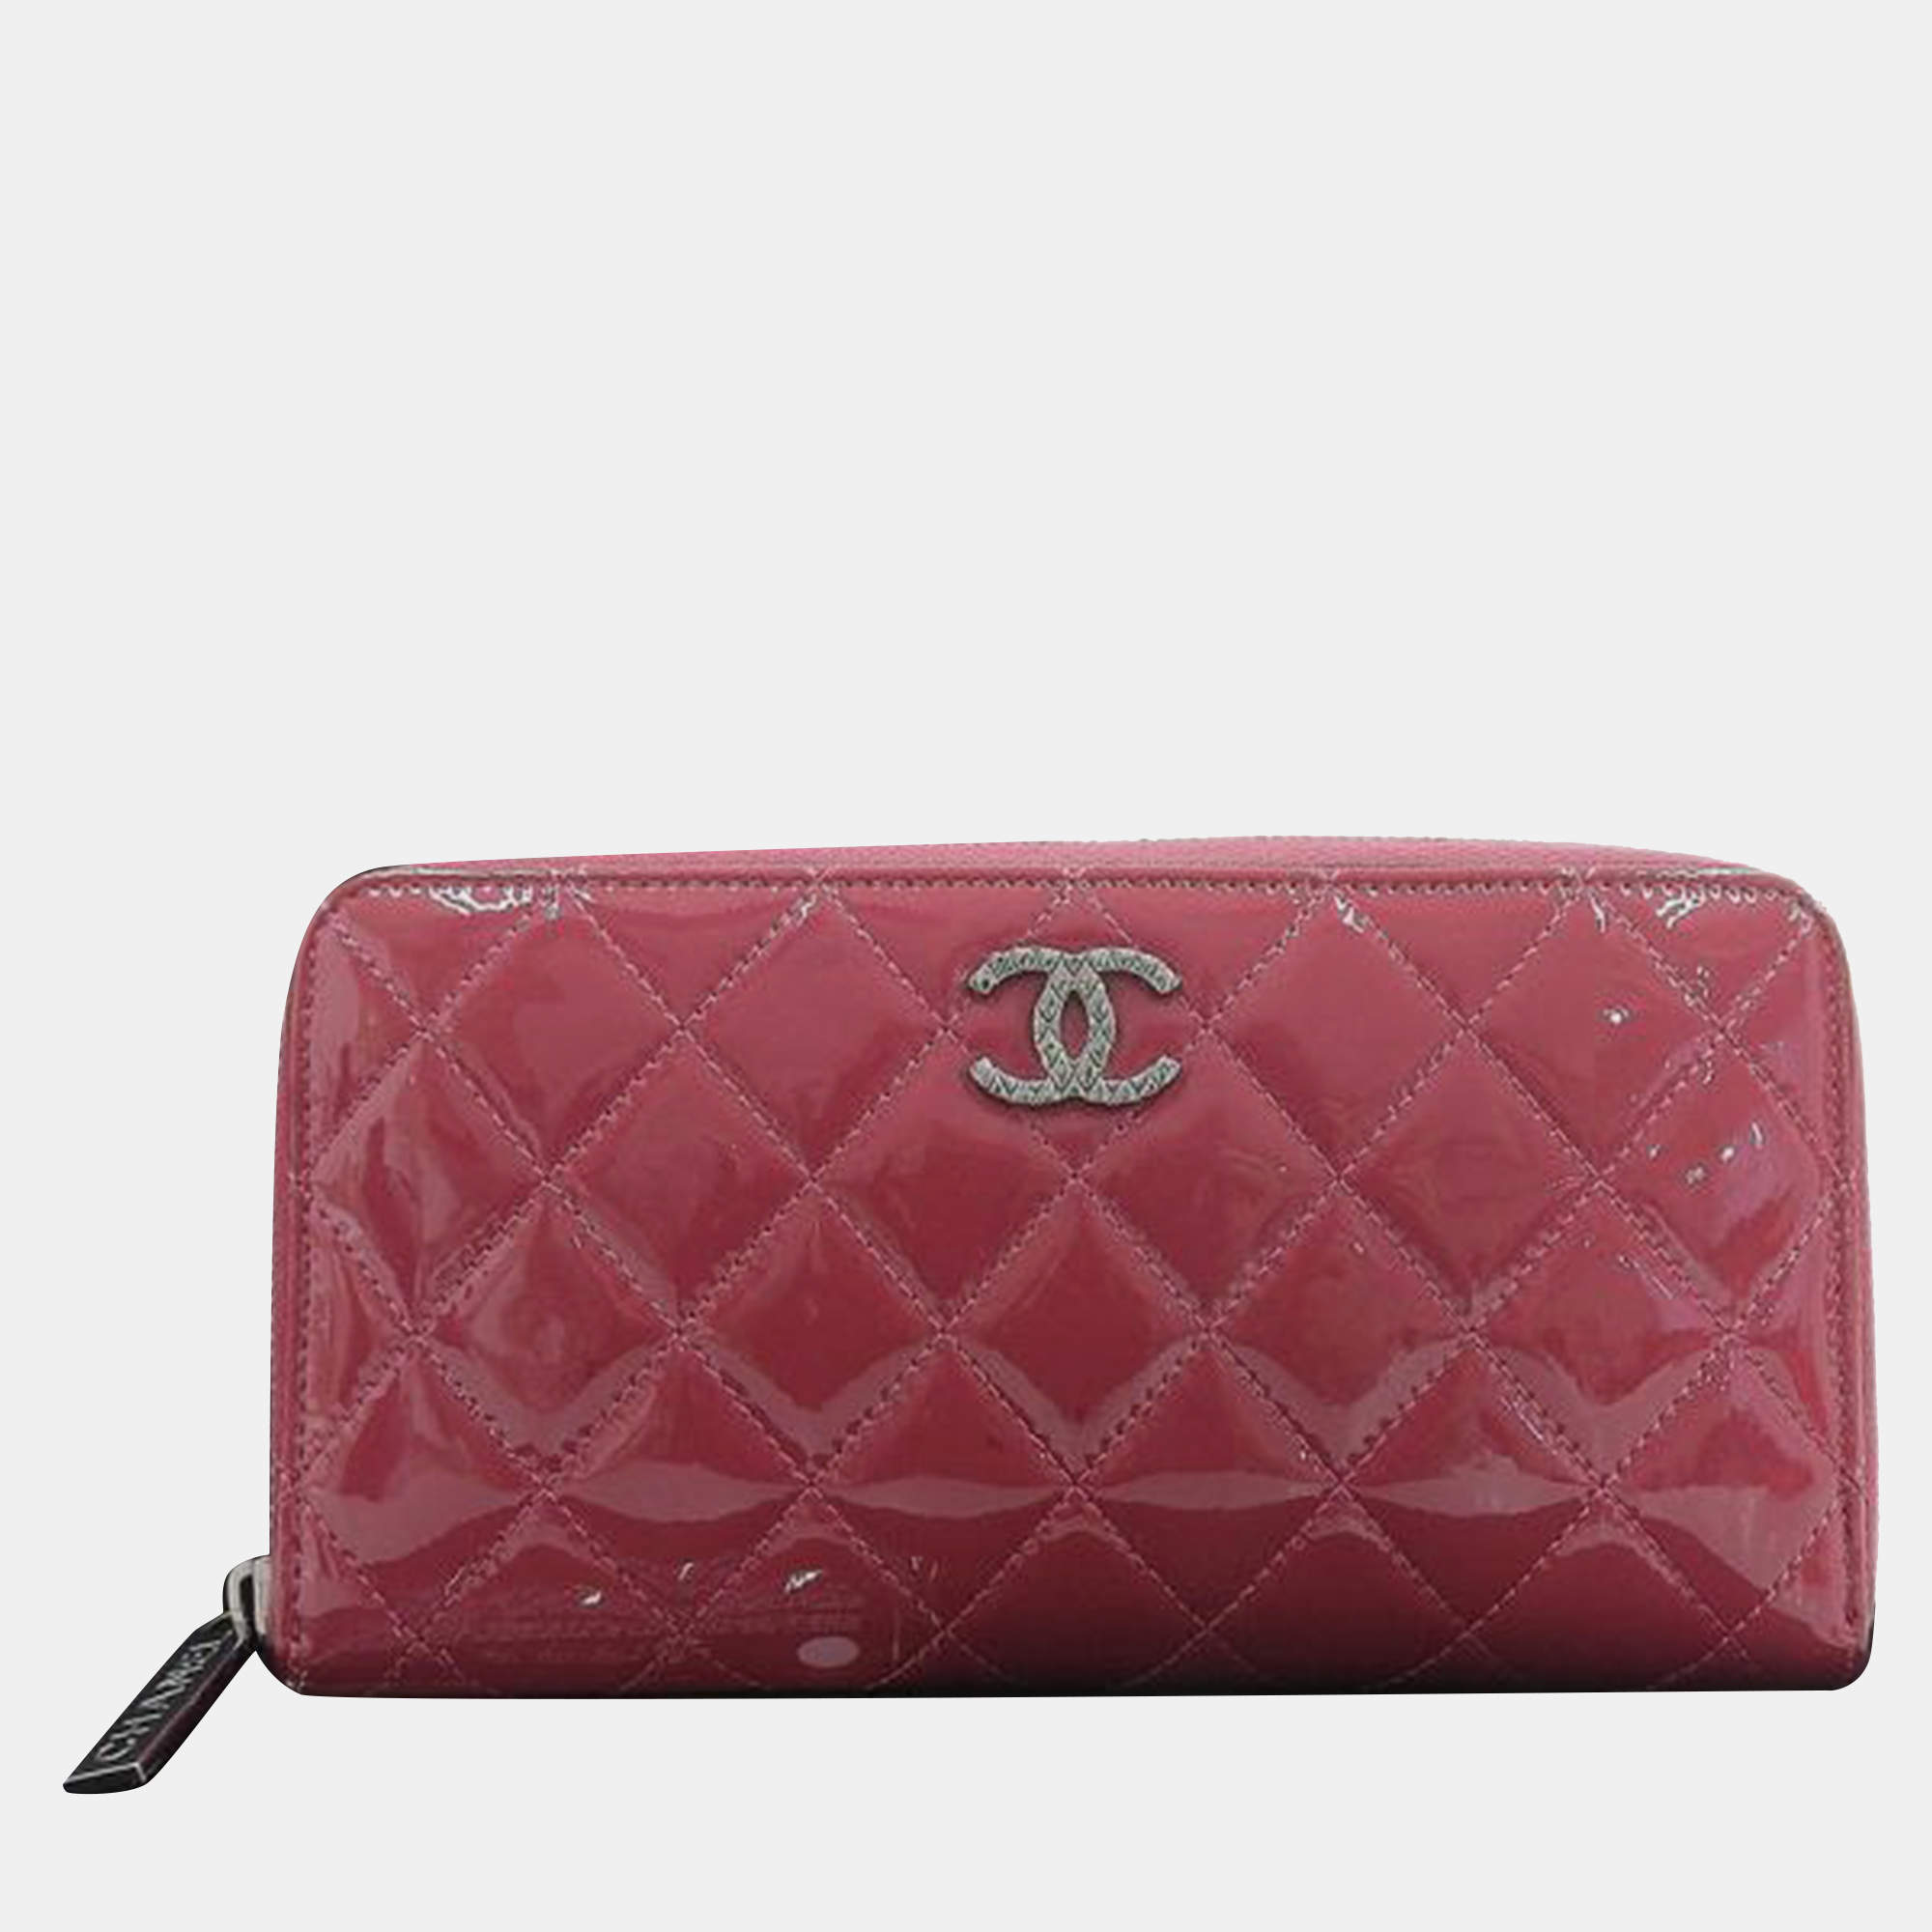 Chanel Pink Leather CC Patent Zip Around Long Wallet